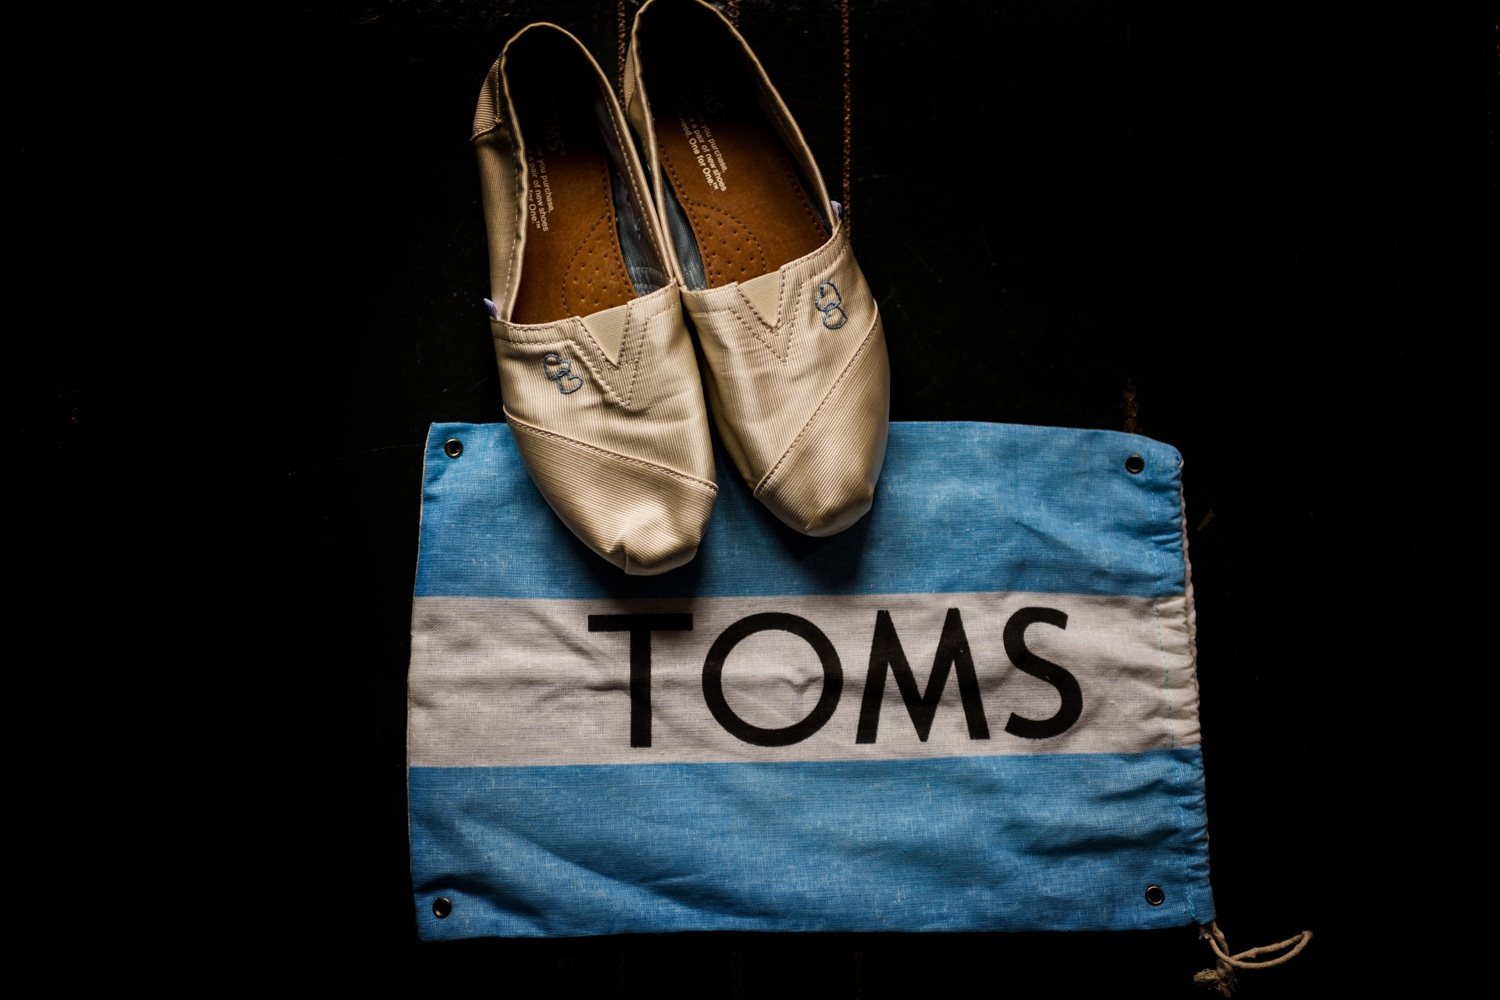 Toms wedding shoes